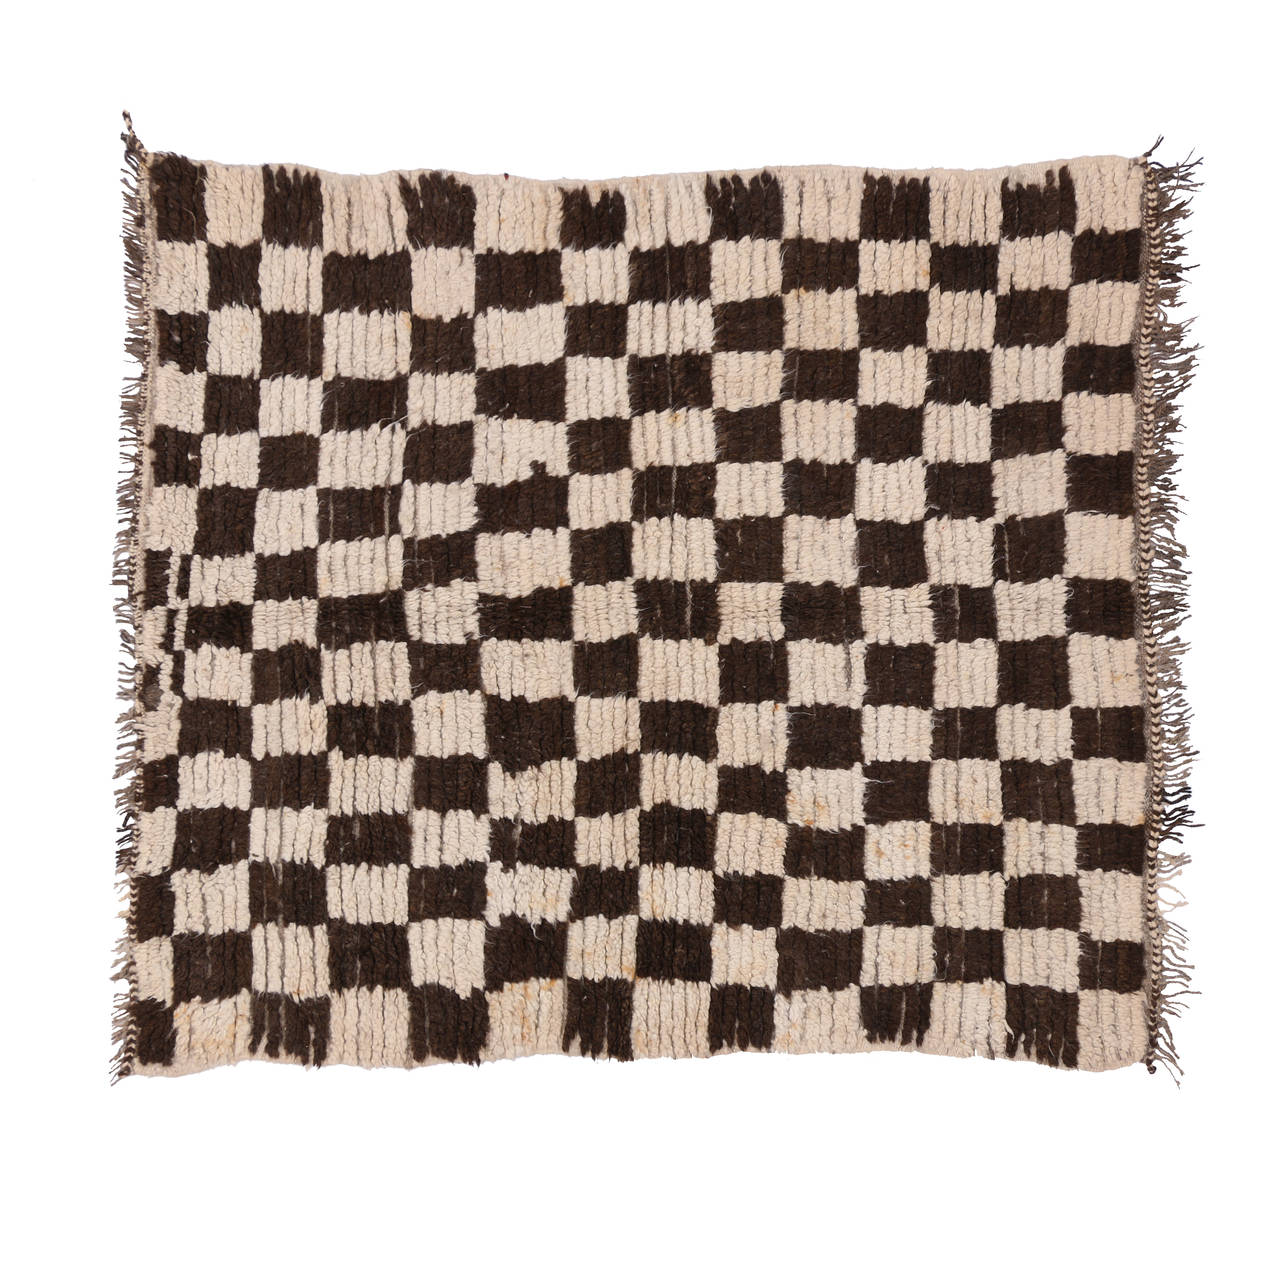 Vintage Berber Moroccan Rug with Retro Checkerboard Design and Cubism Style 4